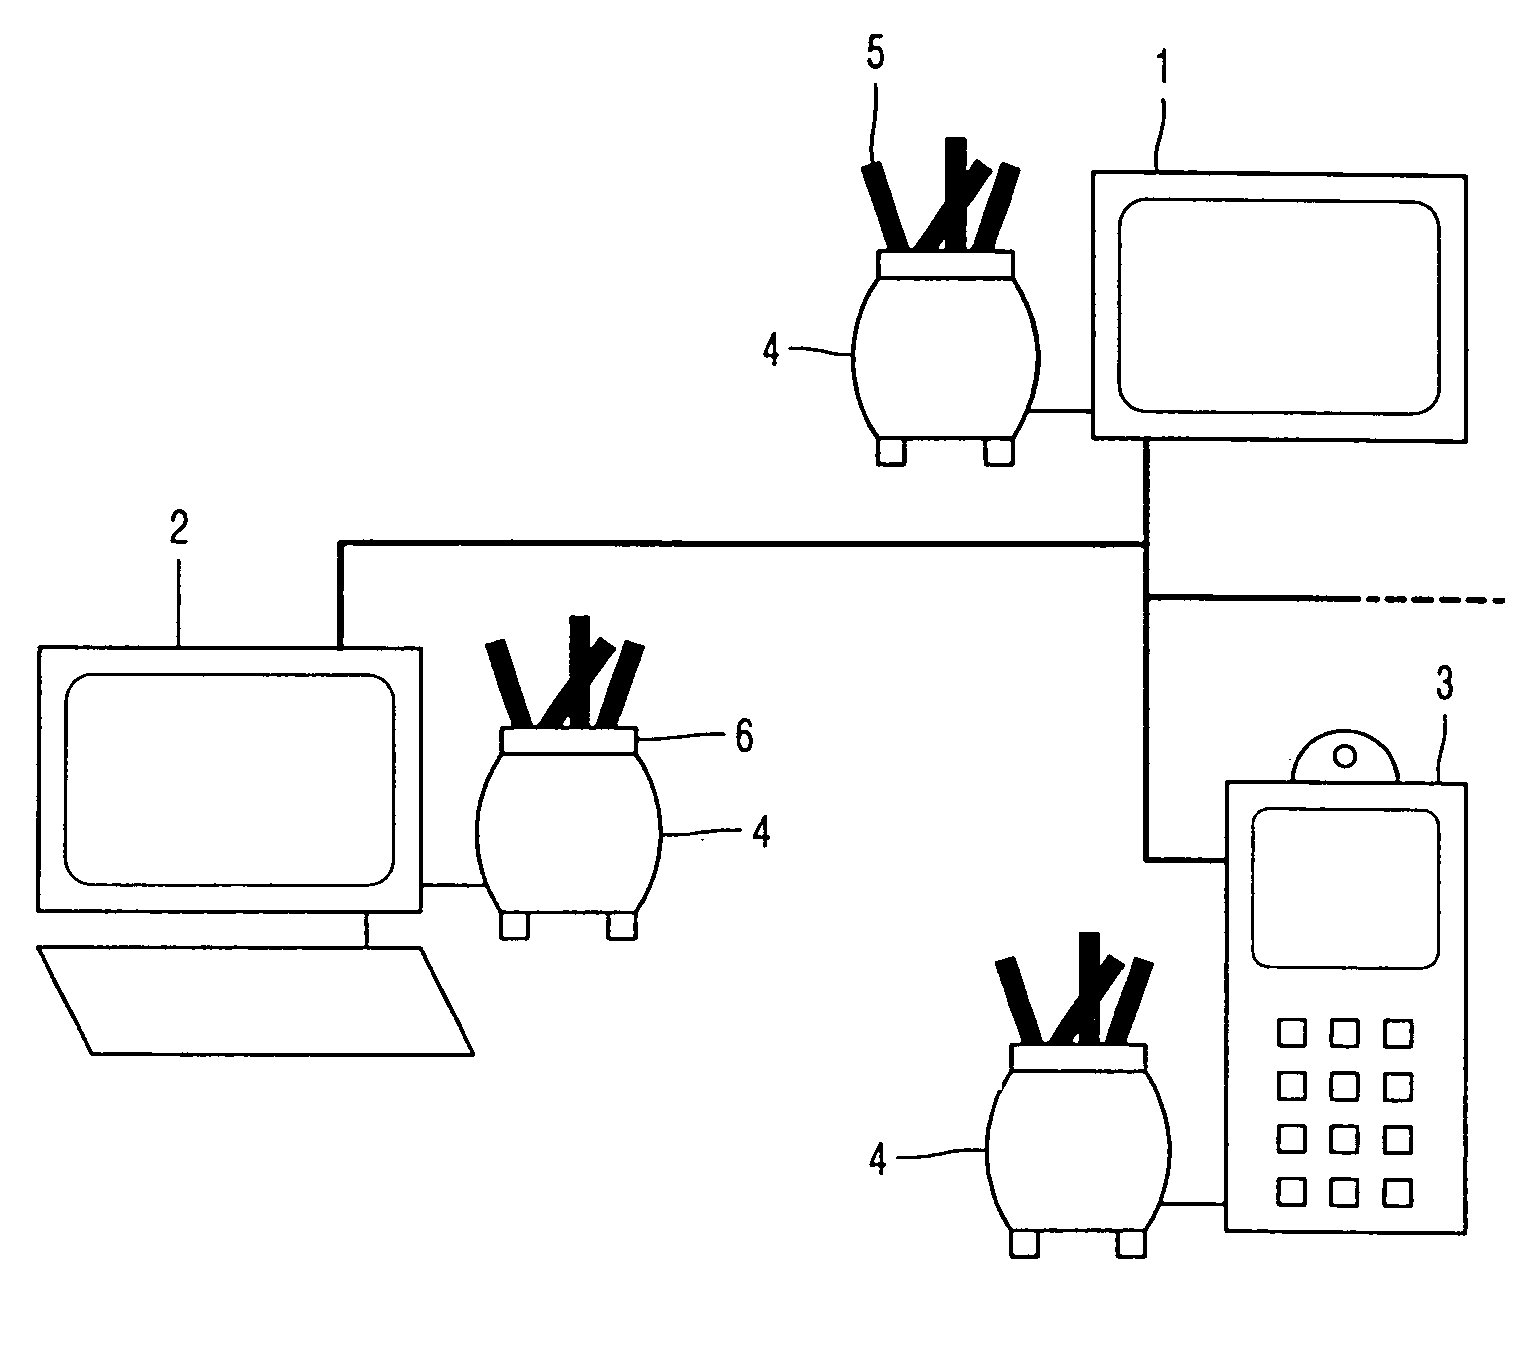 System and method for supporting ongoing activities and relocating the ongoing activities from one terminal to another terminal